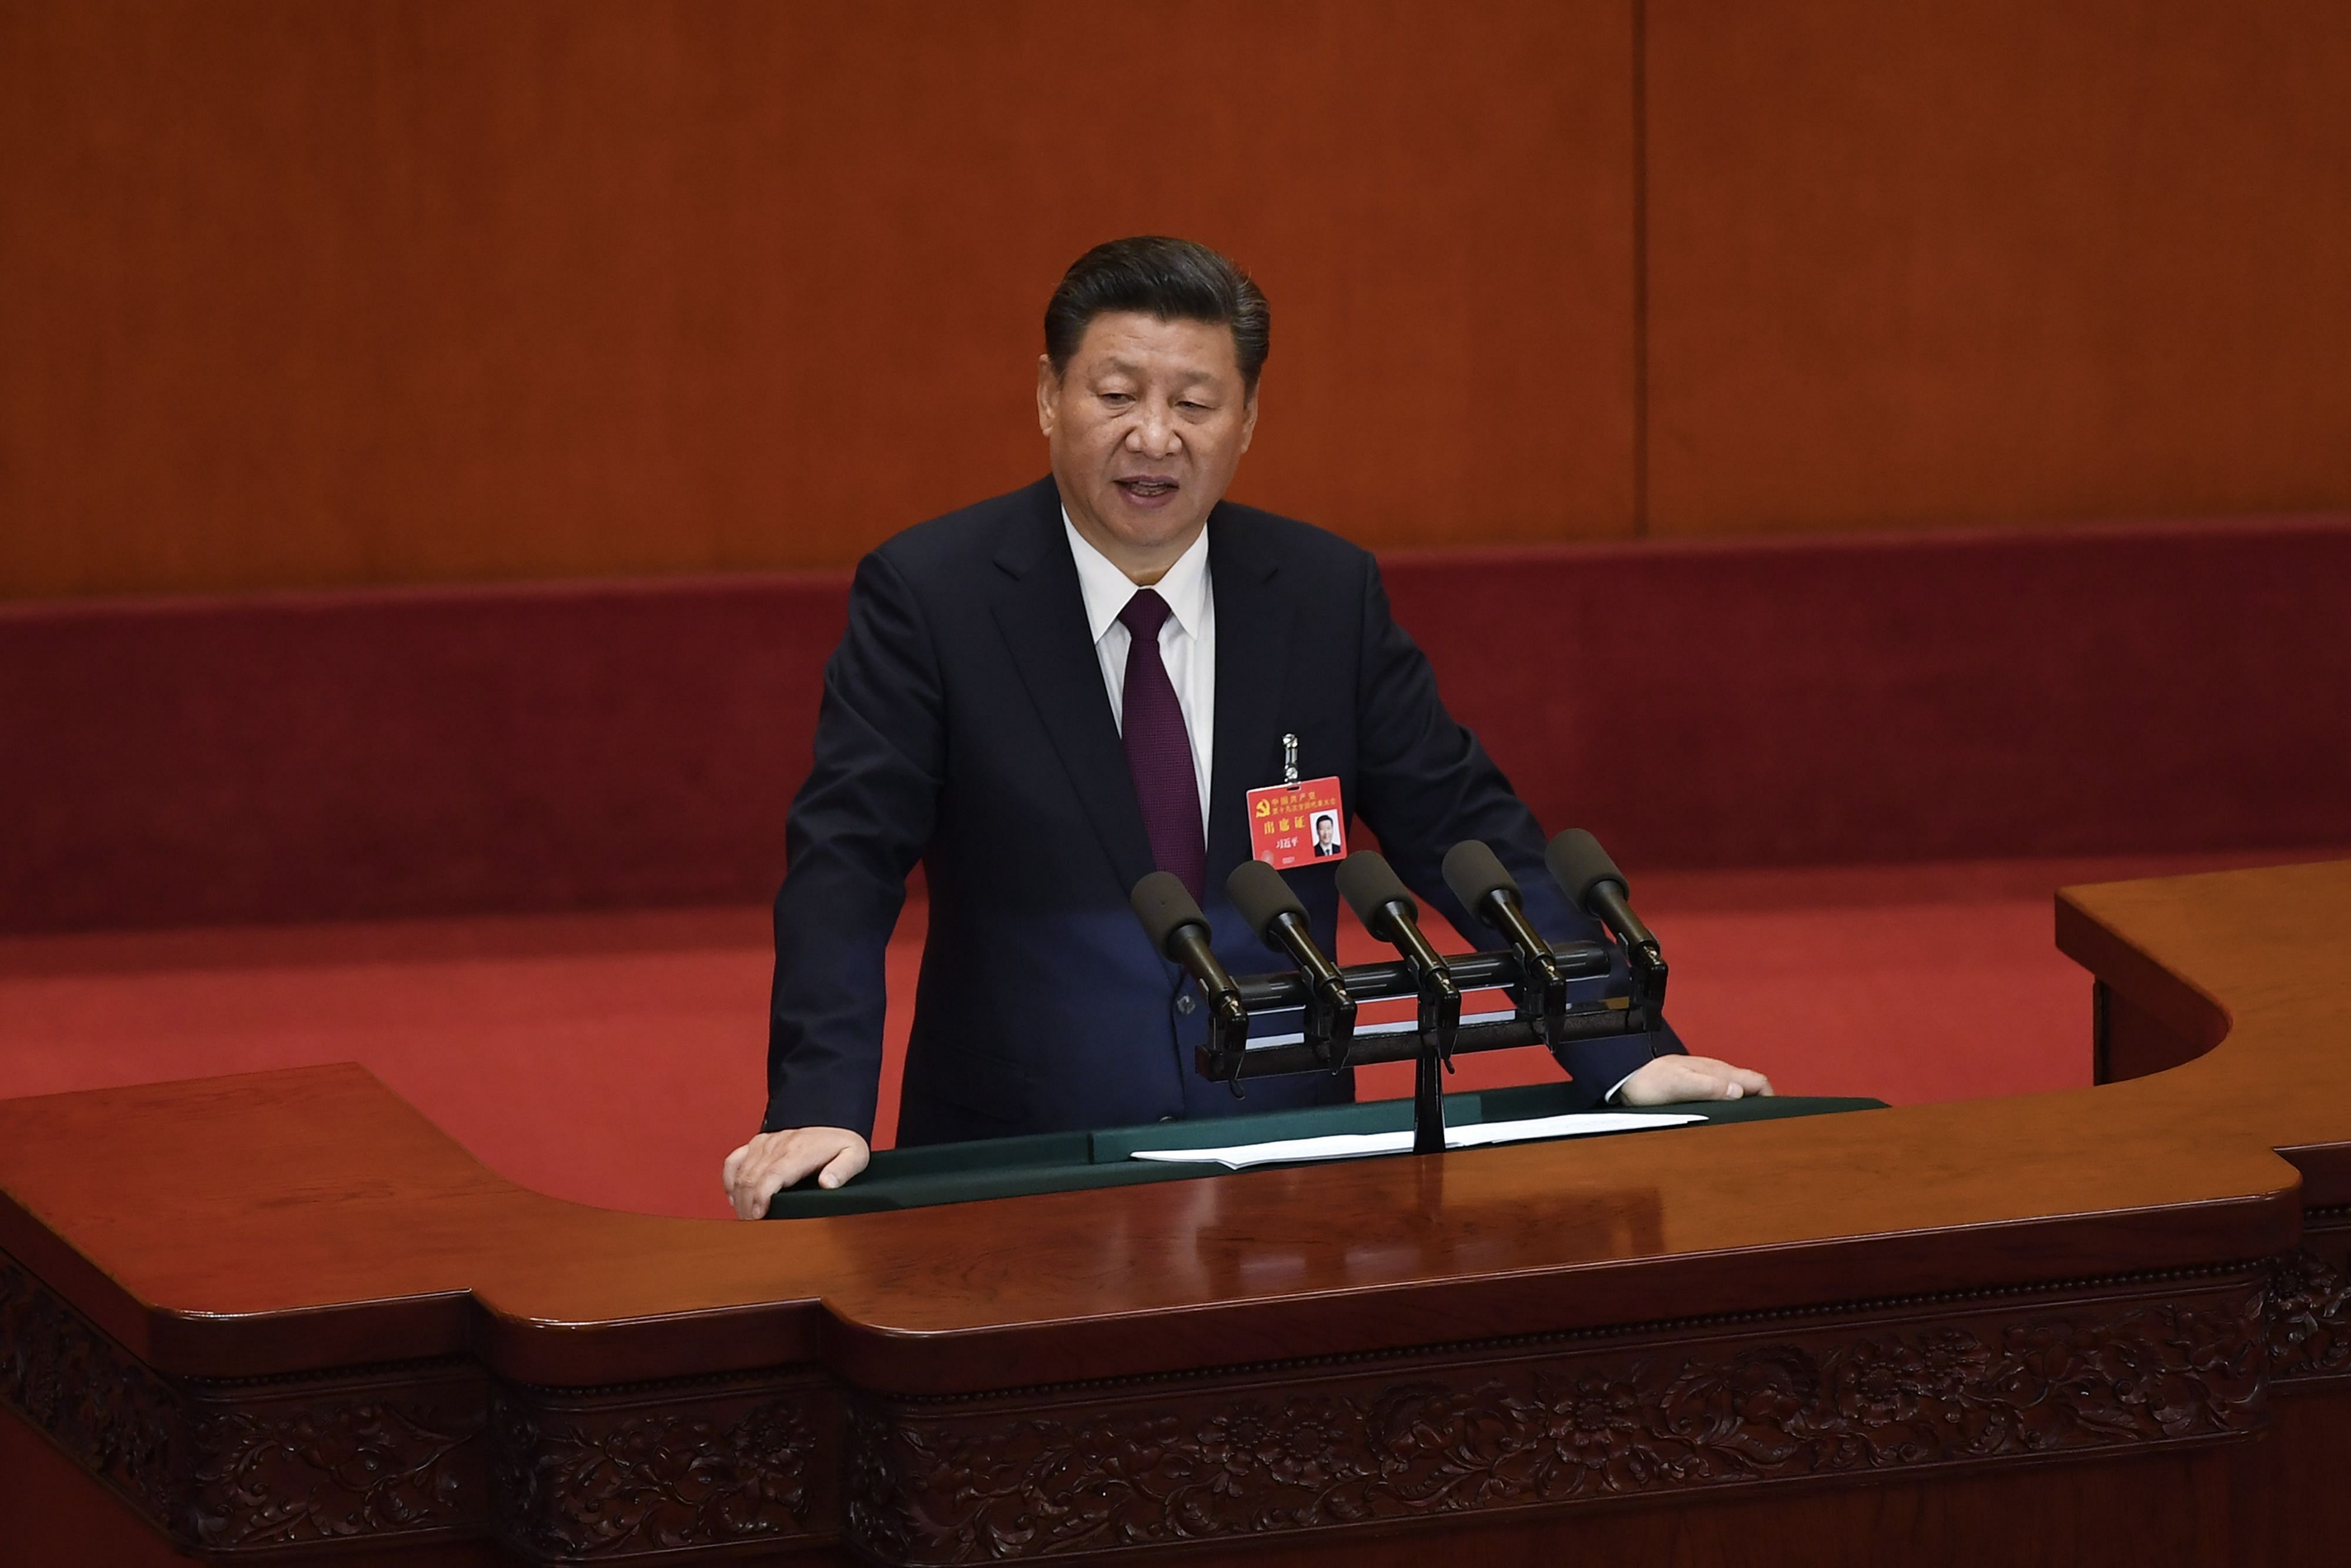 Chinese President Xi Jinping delivering a speech at the opening session of the Chinese Communist Party's Congress. (AFP Photo)